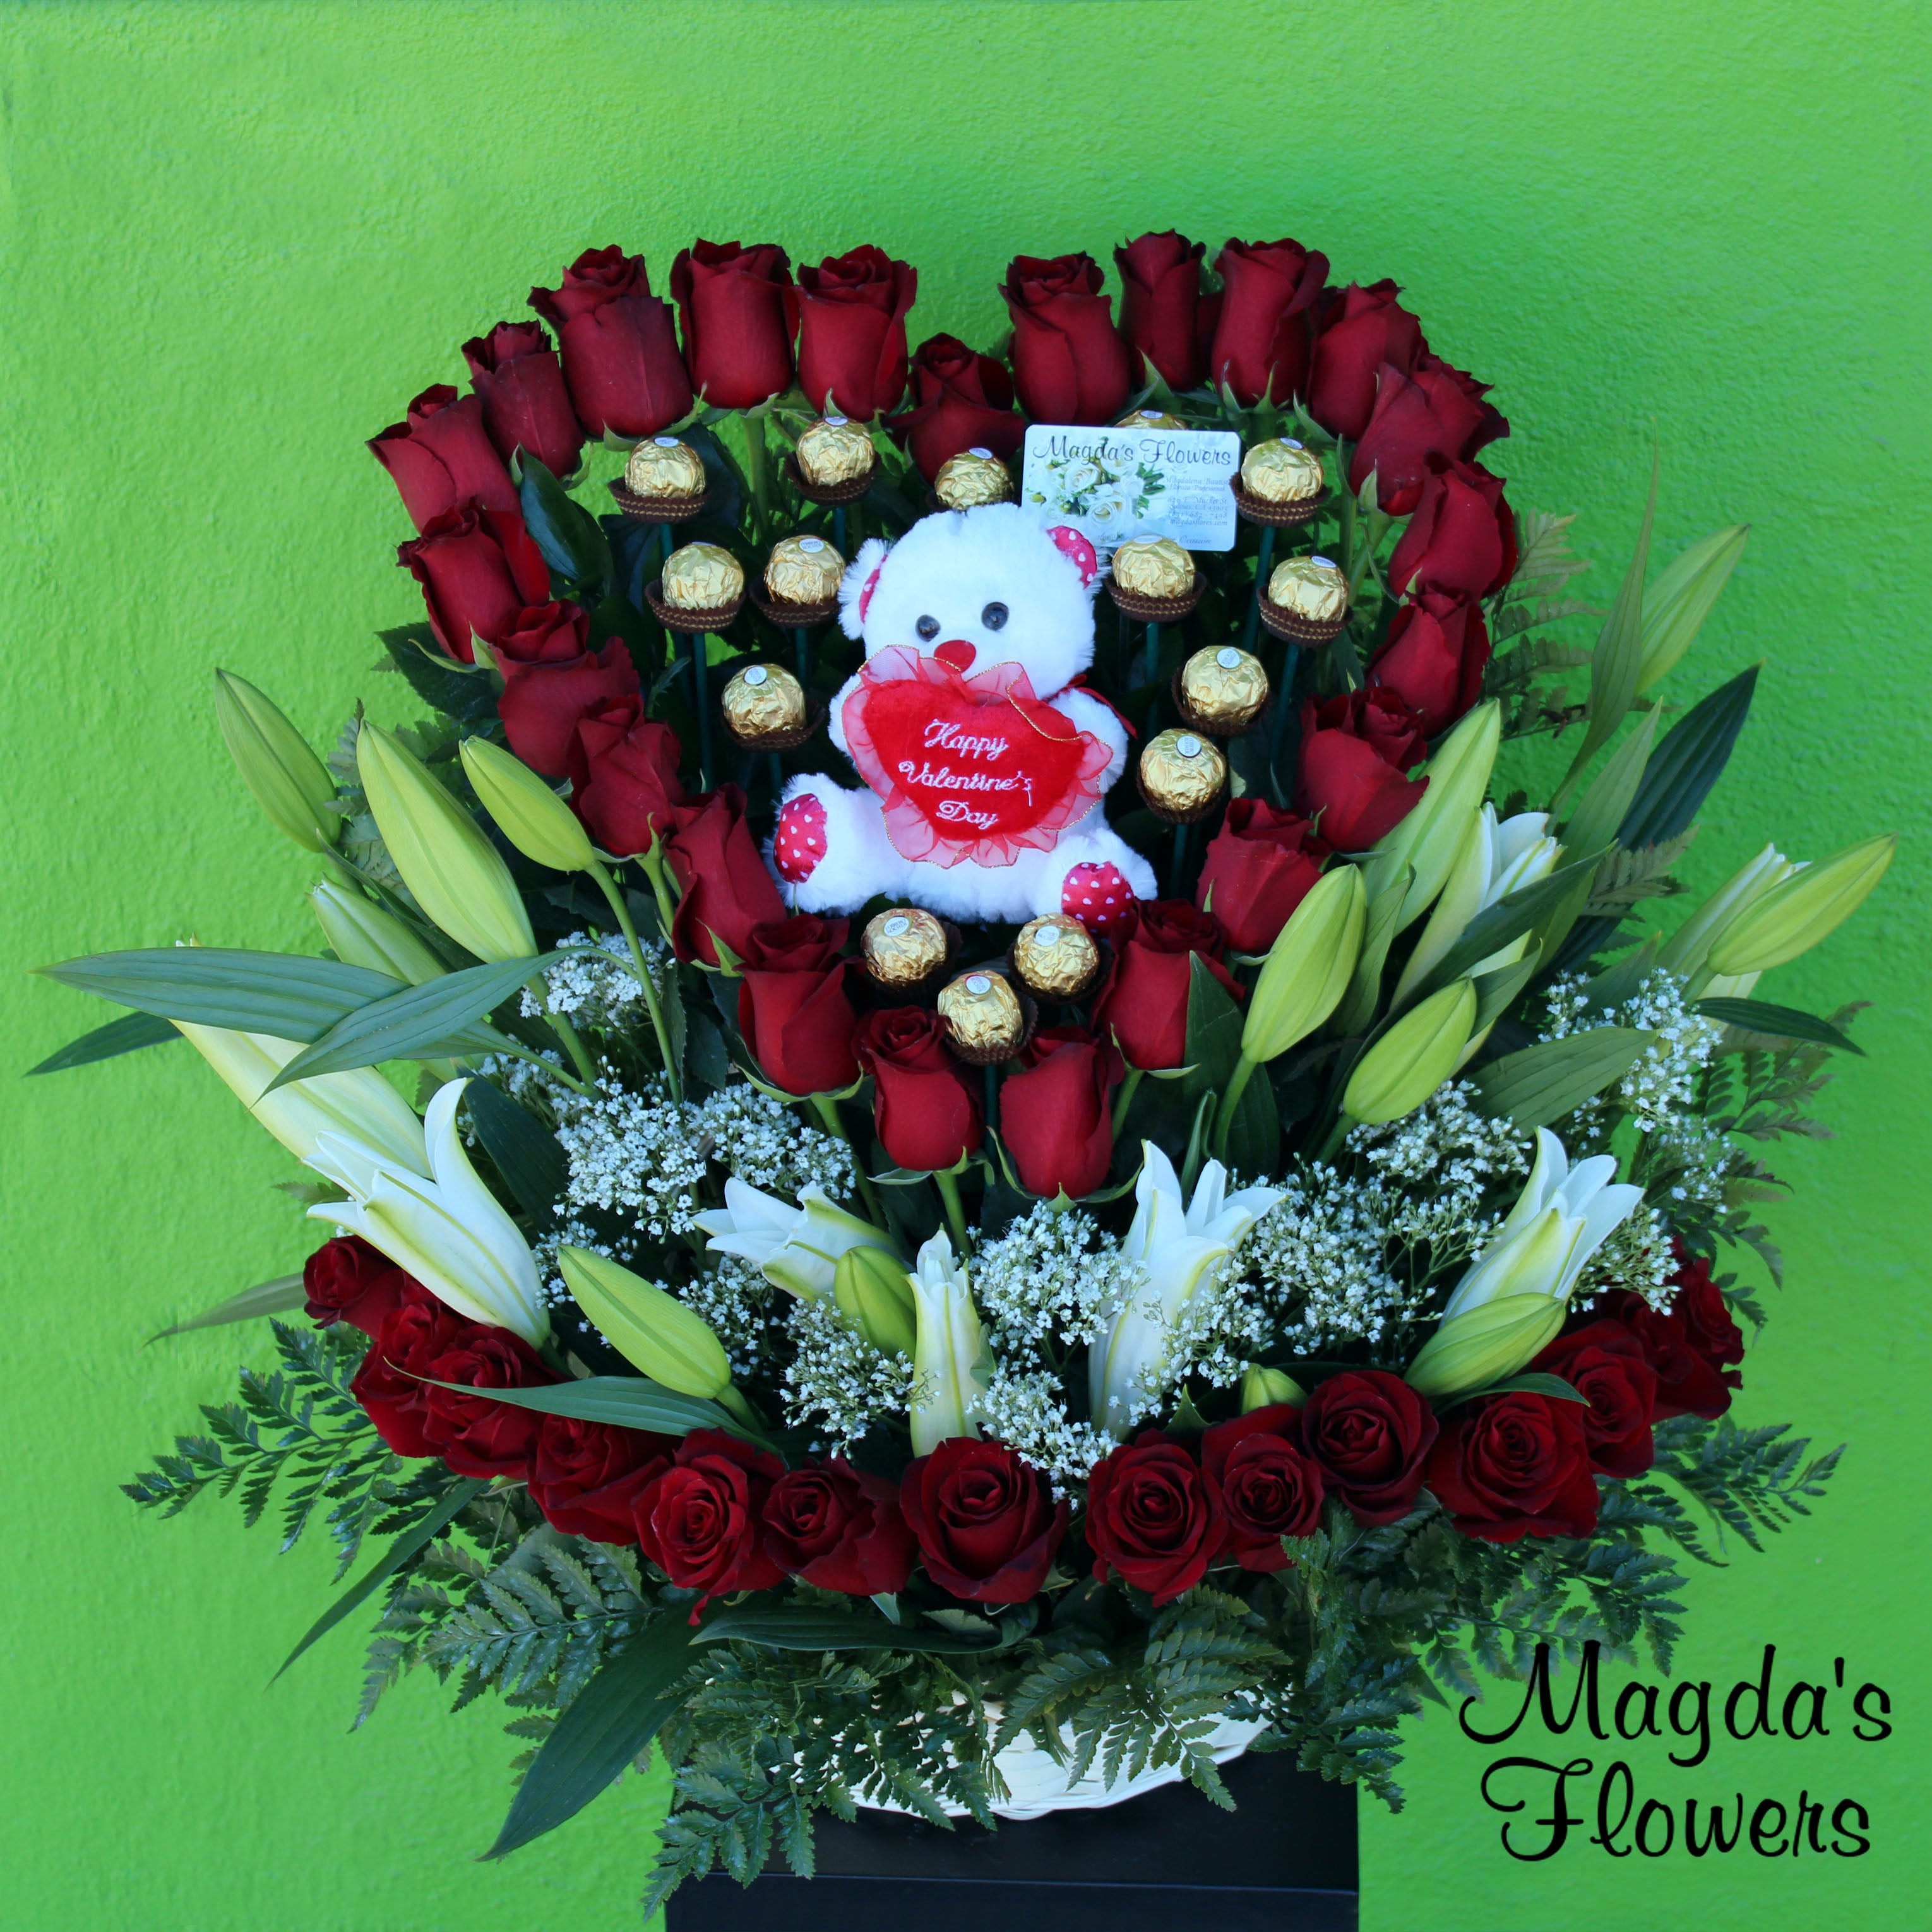 Amor Eterno - This romantic floral arrangement is the perfect symbol of your never-ending love. It features a lovely heart-shaped arrangement of deep red roses, chocolates and a teddy, nestled on a bed of white lilies, red roses and lush greenery. The combination of these flowers creates a stunning bouquet that will remind your loved one of your eternal love. Perfect for Valentine's Day, Anniversaries, or any special occasion that calls for a heartfelt gesture of eternal love.